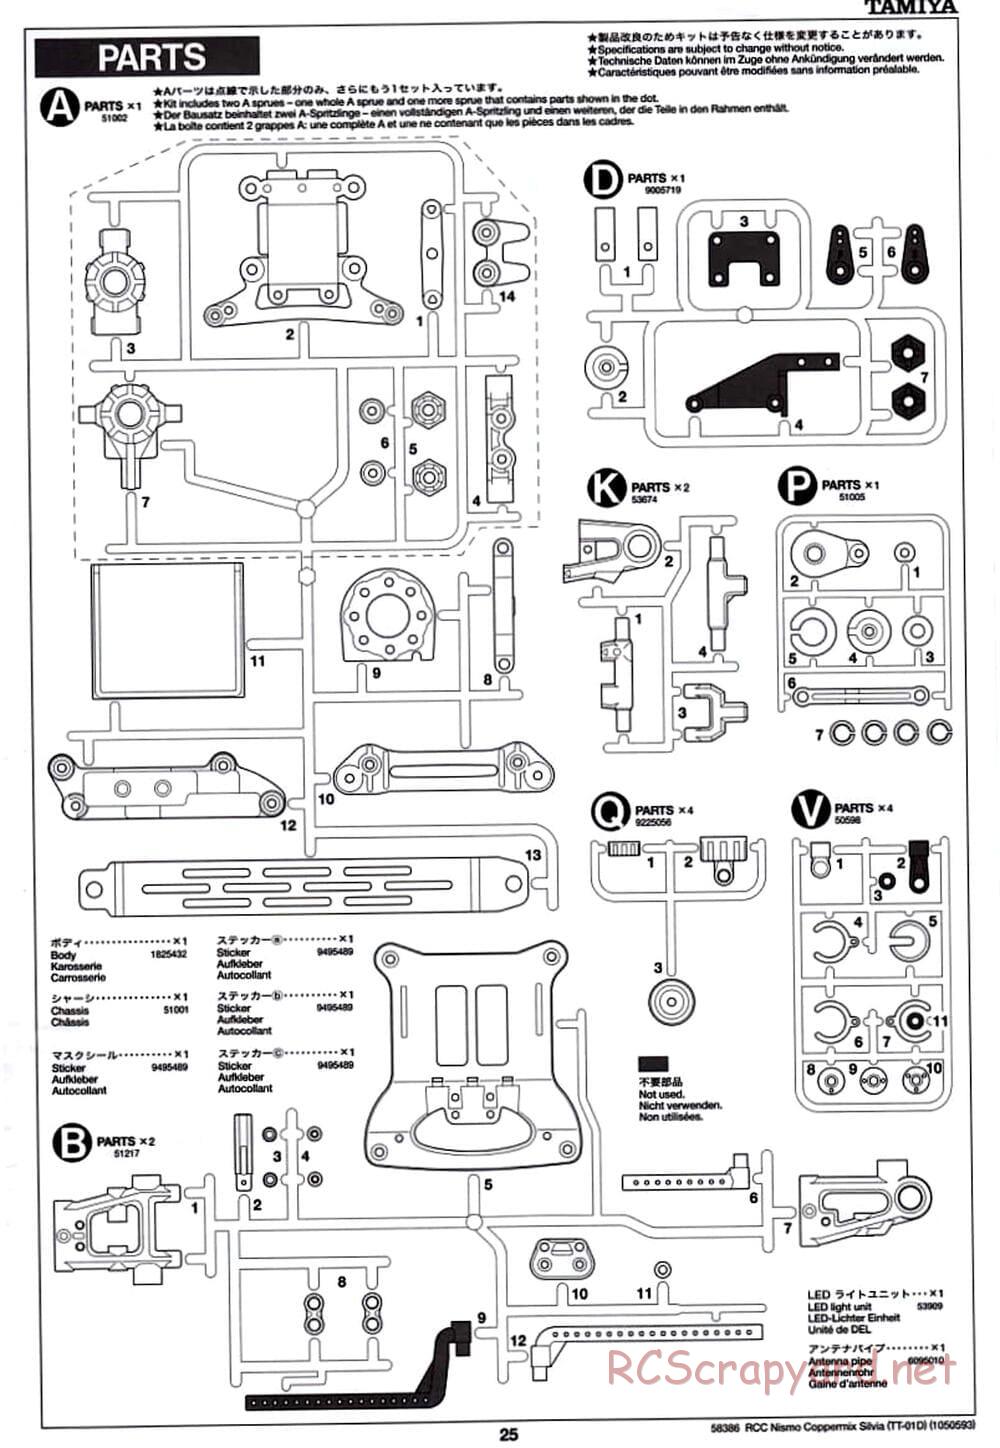 Tamiya - Nismo Coppermix Silvia Drift Spec - TT-01D Chassis - Manual - Page 25